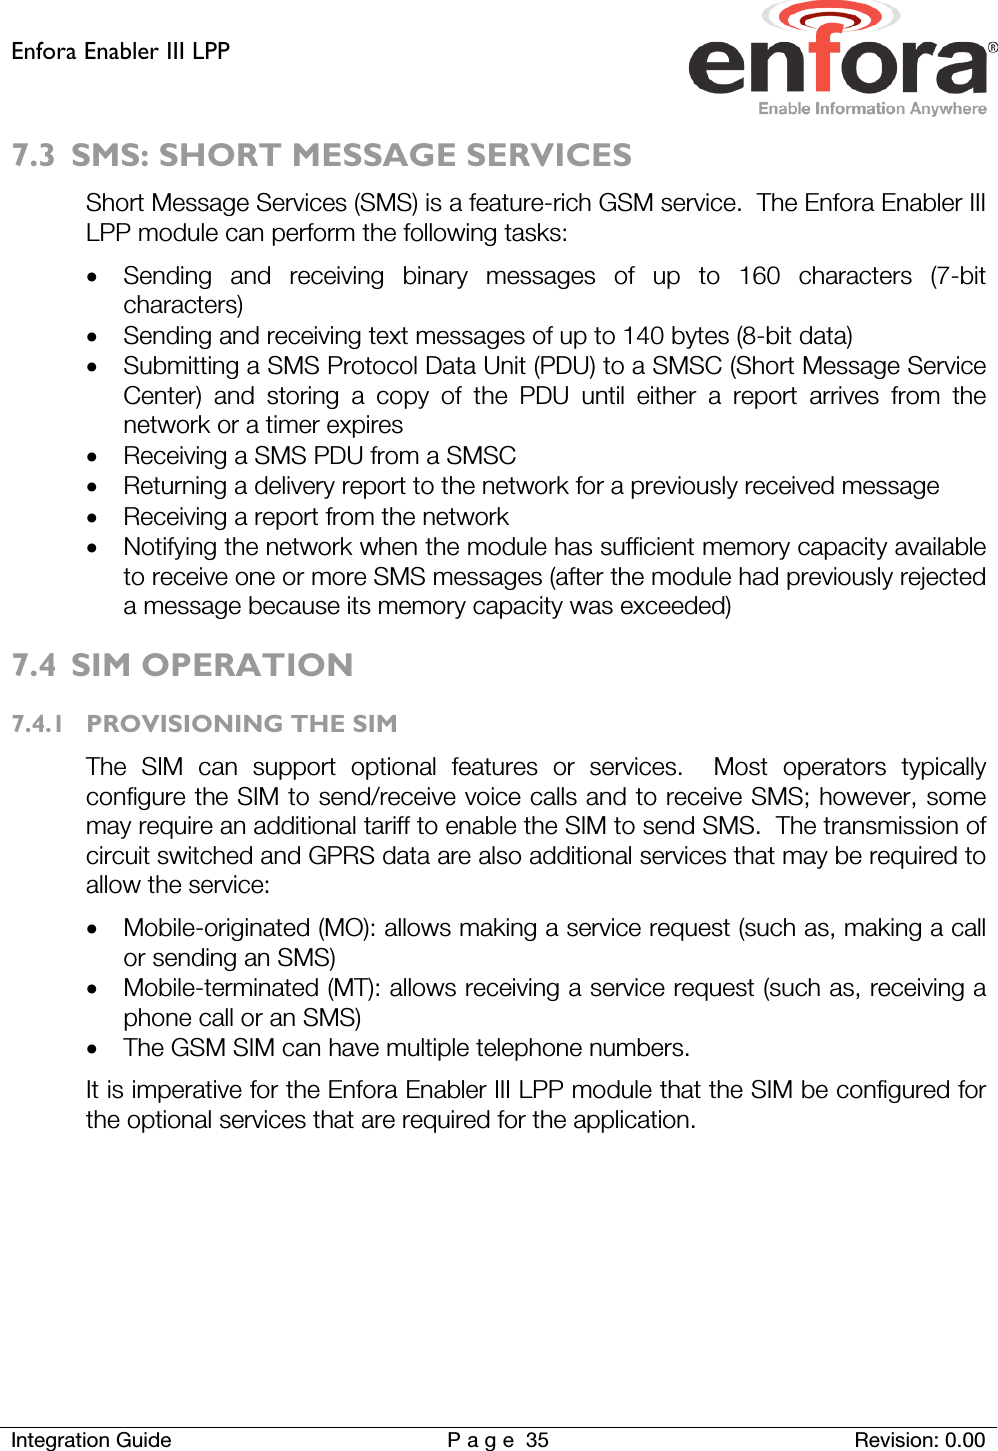 Enfora Enabler III LPP    Integration Guide Page 35 Revision: 0.00  7.3 SMS: SHORT MESSAGE SERVICES Short Message Services (SMS) is a feature-rich GSM service.  The Enfora Enabler III LPP module can perform the following tasks: • Sending and receiving binary messages of up to 160 characters (7-bit characters) • Sending and receiving text messages of up to 140 bytes (8-bit data) • Submitting a SMS Protocol Data Unit (PDU) to a SMSC (Short Message Service Center) and storing a copy of the PDU until either a report arrives from the network or a timer expires • Receiving a SMS PDU from a SMSC • Returning a delivery report to the network for a previously received message • Receiving a report from the network • Notifying the network when the module has sufficient memory capacity available to receive one or more SMS messages (after the module had previously rejected a message because its memory capacity was exceeded) 7.4 SIM OPERATION 7.4.1 PROVISIONING THE SIM The SIM can support optional features or services.  Most operators typically configure the SIM to send/receive voice calls and to receive SMS; however, some may require an additional tariff to enable the SIM to send SMS.  The transmission of circuit switched and GPRS data are also additional services that may be required to allow the service: • Mobile-originated (MO): allows making a service request (such as, making a call or sending an SMS) • Mobile-terminated (MT): allows receiving a service request (such as, receiving a phone call or an SMS) • The GSM SIM can have multiple telephone numbers. It is imperative for the Enfora Enabler III LPP module that the SIM be configured for the optional services that are required for the application.   